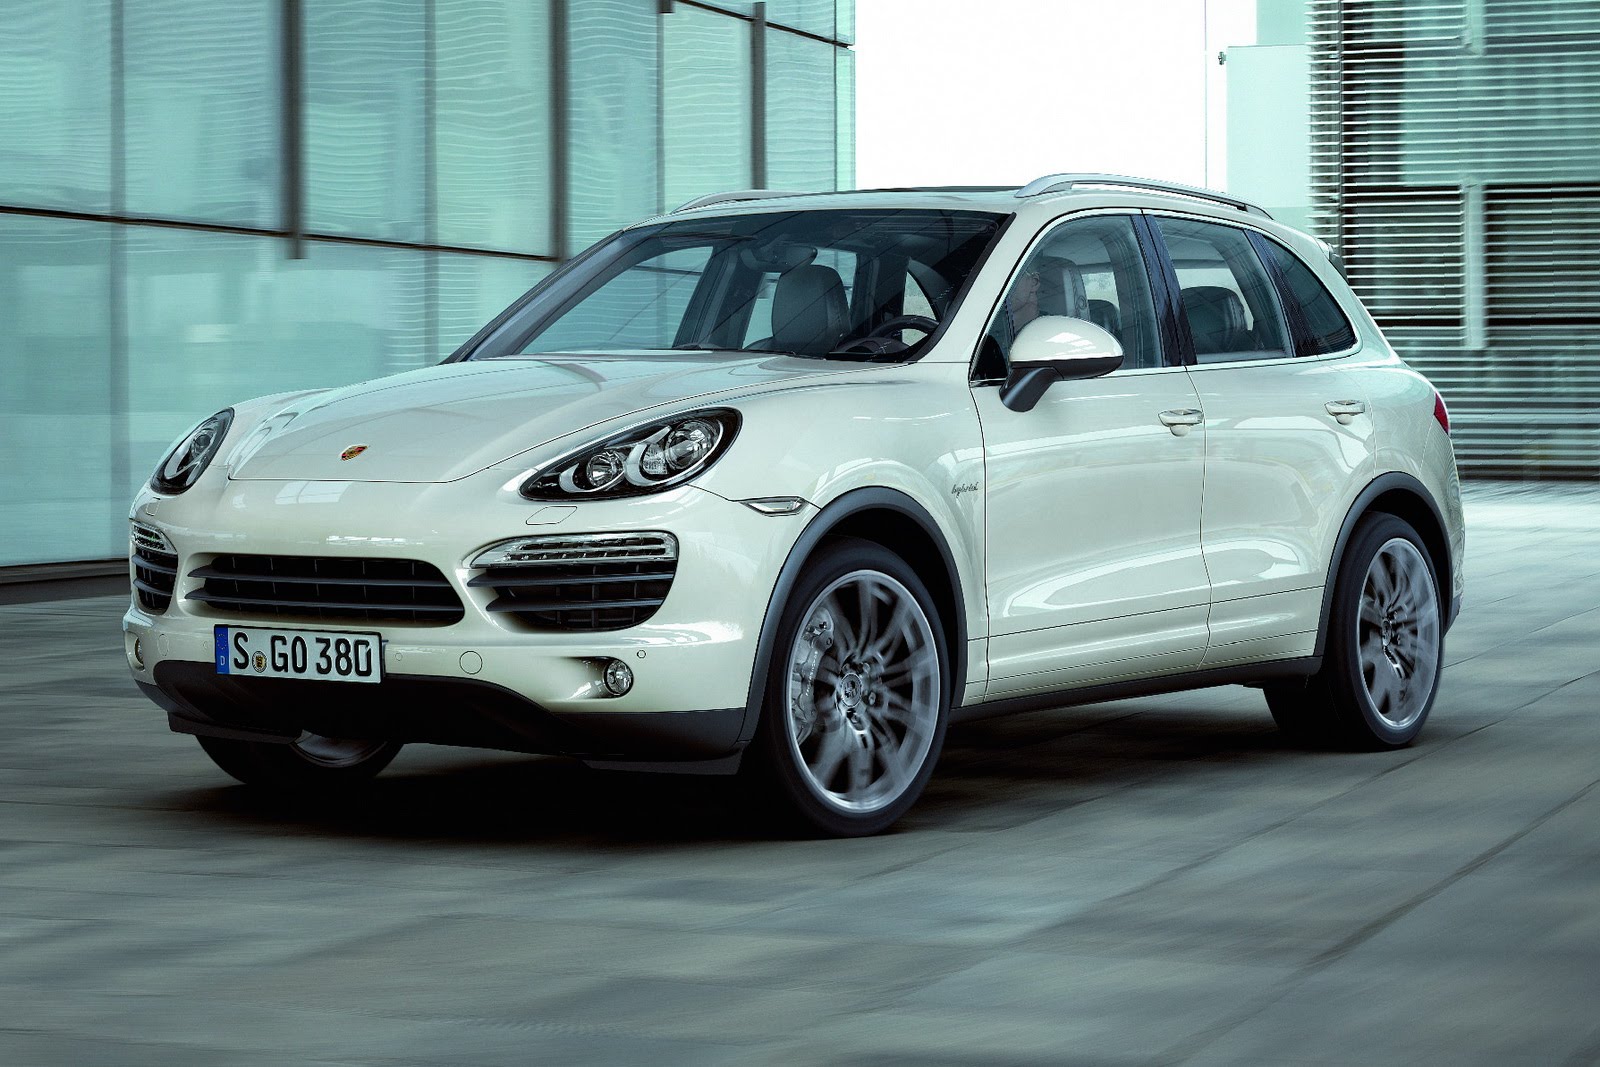 Porsche Sales Increase Substantially, Cayenne Leads the Pack | Carscoops